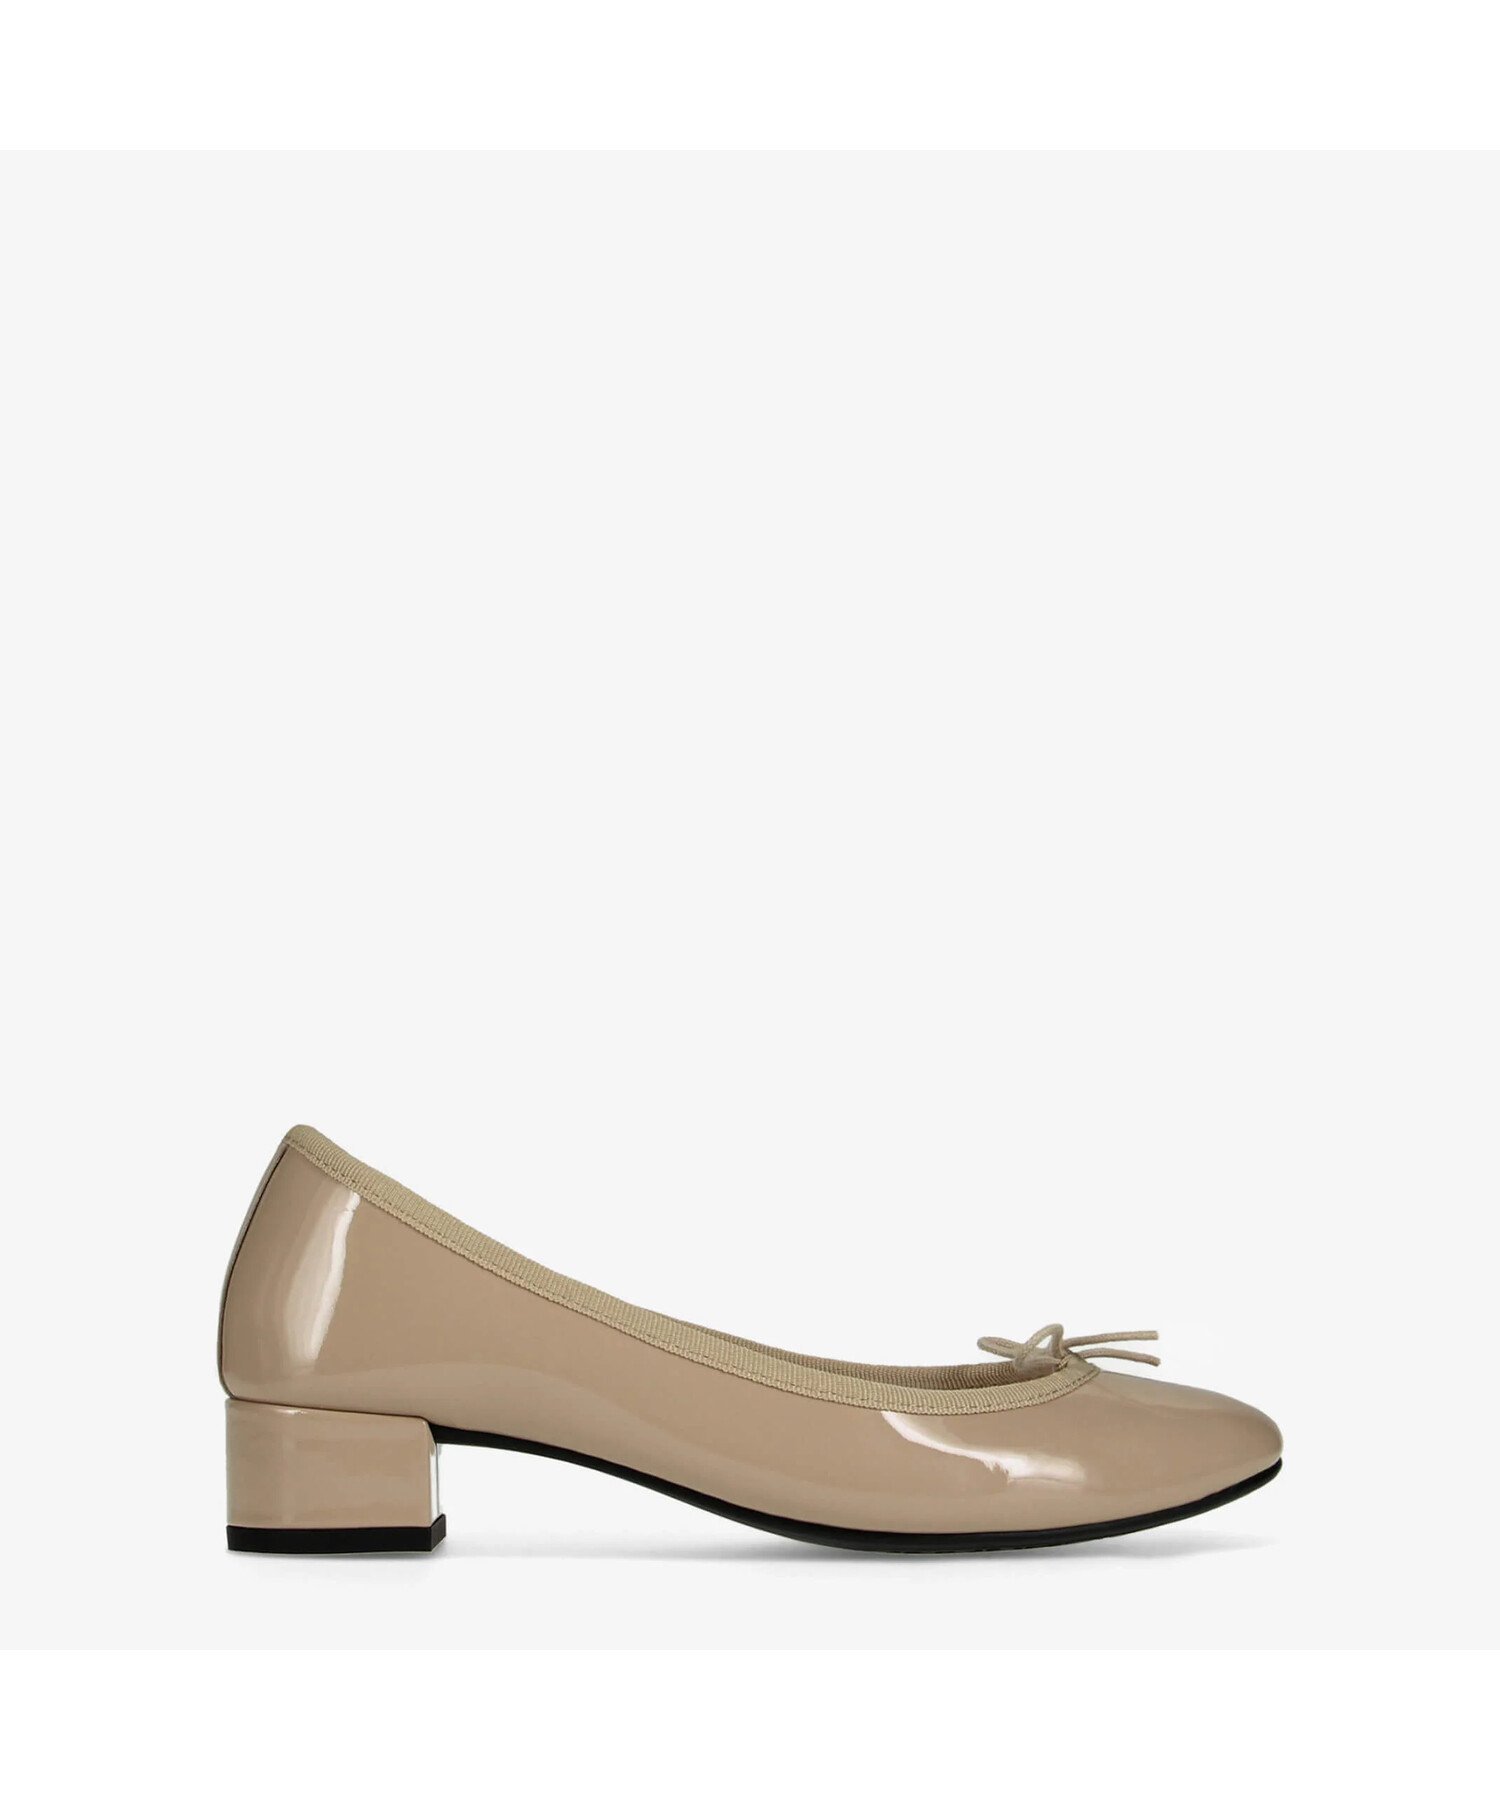 【SALE／20%OFF】Repetto Camille gomme Ballerinas【New Size】 レペット シューズ・靴 バレエシューズ【送料無料】